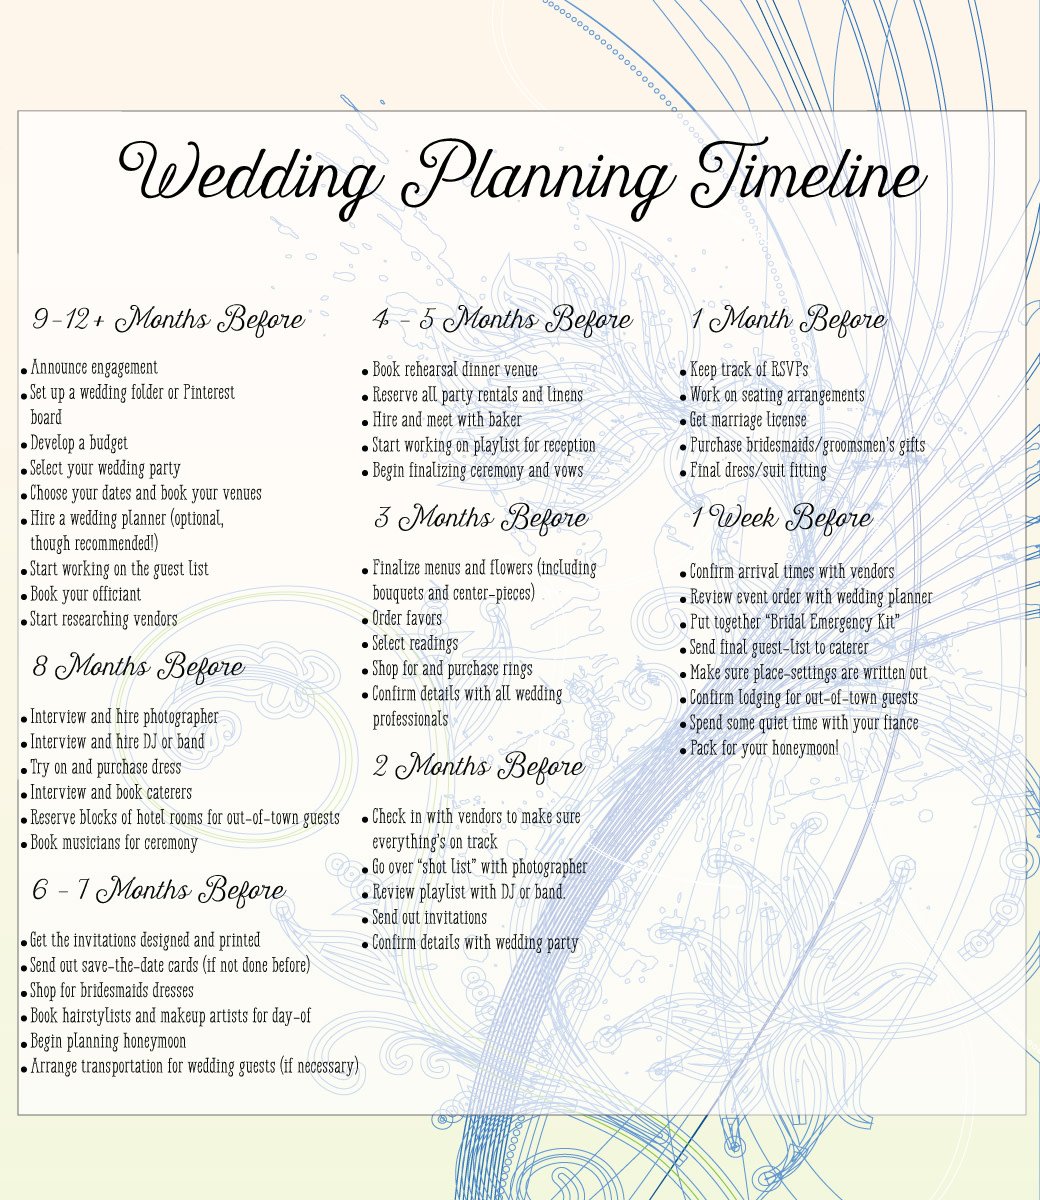 Things Needed for Planning a Wedding: A Complete Checklist